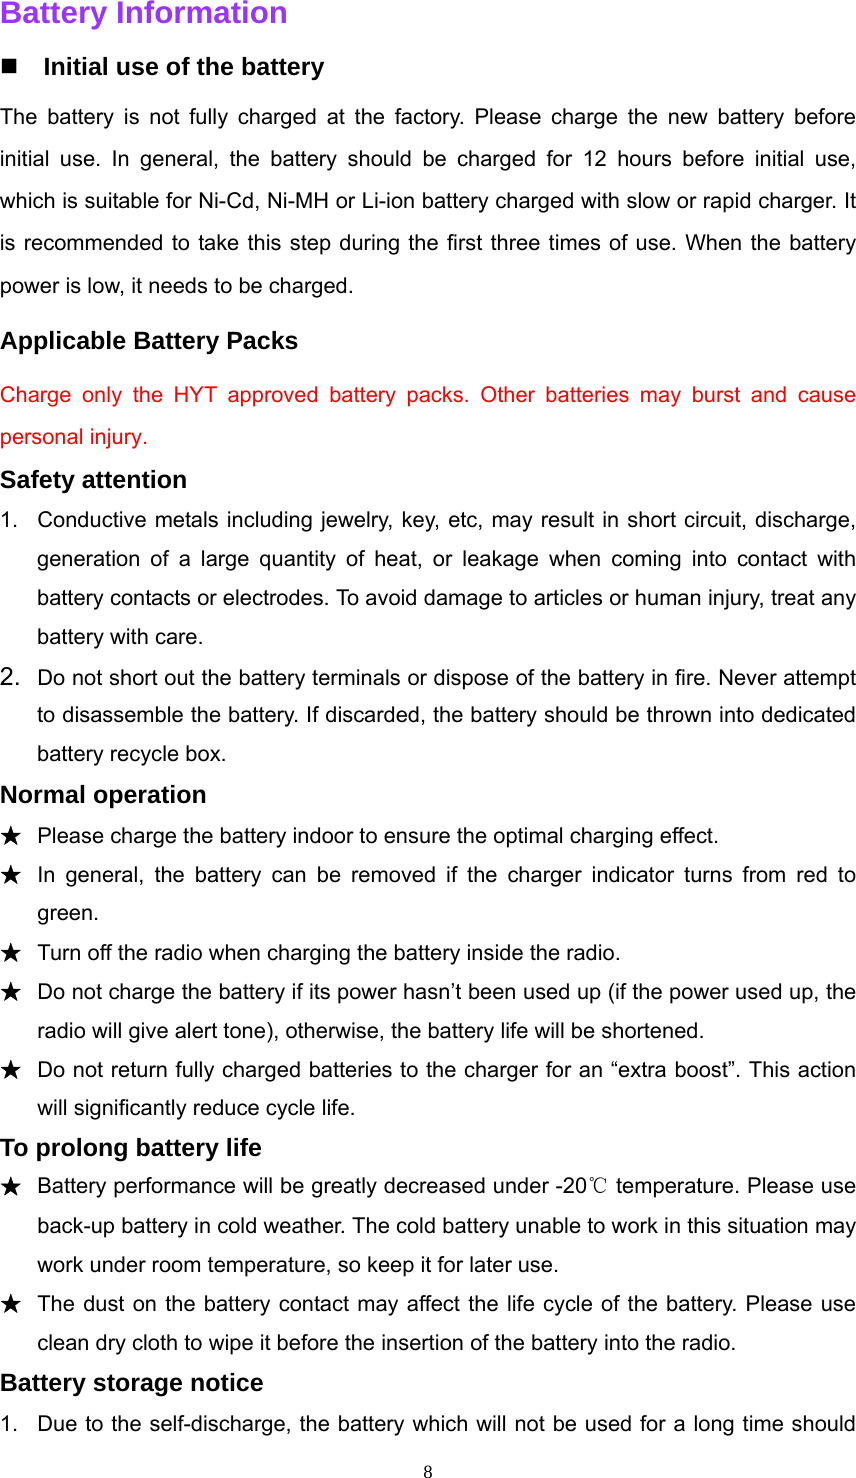  8Battery Information    Initial use of the battery The battery is not fully charged at the factory. Please charge the new battery before initial use. In general, the battery should be charged for 12 hours before initial use, which is suitable for Ni-Cd, Ni-MH or Li-ion battery charged with slow or rapid charger. It is recommended to take this step during the first three times of use. When the battery power is low, it needs to be charged. Applicable Battery Packs Charge only the HYT approved battery packs. Other batteries may burst and cause personal injury. Safety attention 1.  Conductive metals including jewelry, key, etc, may result in short circuit, discharge, generation of a large quantity of heat, or leakage when coming into contact with battery contacts or electrodes. To avoid damage to articles or human injury, treat any battery with care. 2.  Do not short out the battery terminals or dispose of the battery in fire. Never attempt to disassemble the battery. If discarded, the battery should be thrown into dedicated battery recycle box. Normal operation ★ Please charge the battery indoor to ensure the optimal charging effect. ★ In general, the battery can be removed if the charger indicator turns from red to green. ★ Turn off the radio when charging the battery inside the radio. ★ Do not charge the battery if its power hasn’t been used up (if the power used up, the radio will give alert tone), otherwise, the battery life will be shortened. ★ Do not return fully charged batteries to the charger for an “extra boost”. This action will significantly reduce cycle life.   To prolong battery life ★ Battery performance will be greatly decreased under -20℃ temperature. Please use back-up battery in cold weather. The cold battery unable to work in this situation may work under room temperature, so keep it for later use.   ★ The dust on the battery contact may affect the life cycle of the battery. Please use clean dry cloth to wipe it before the insertion of the battery into the radio.   Battery storage notice 1.  Due to the self-discharge, the battery which will not be used for a long time should 